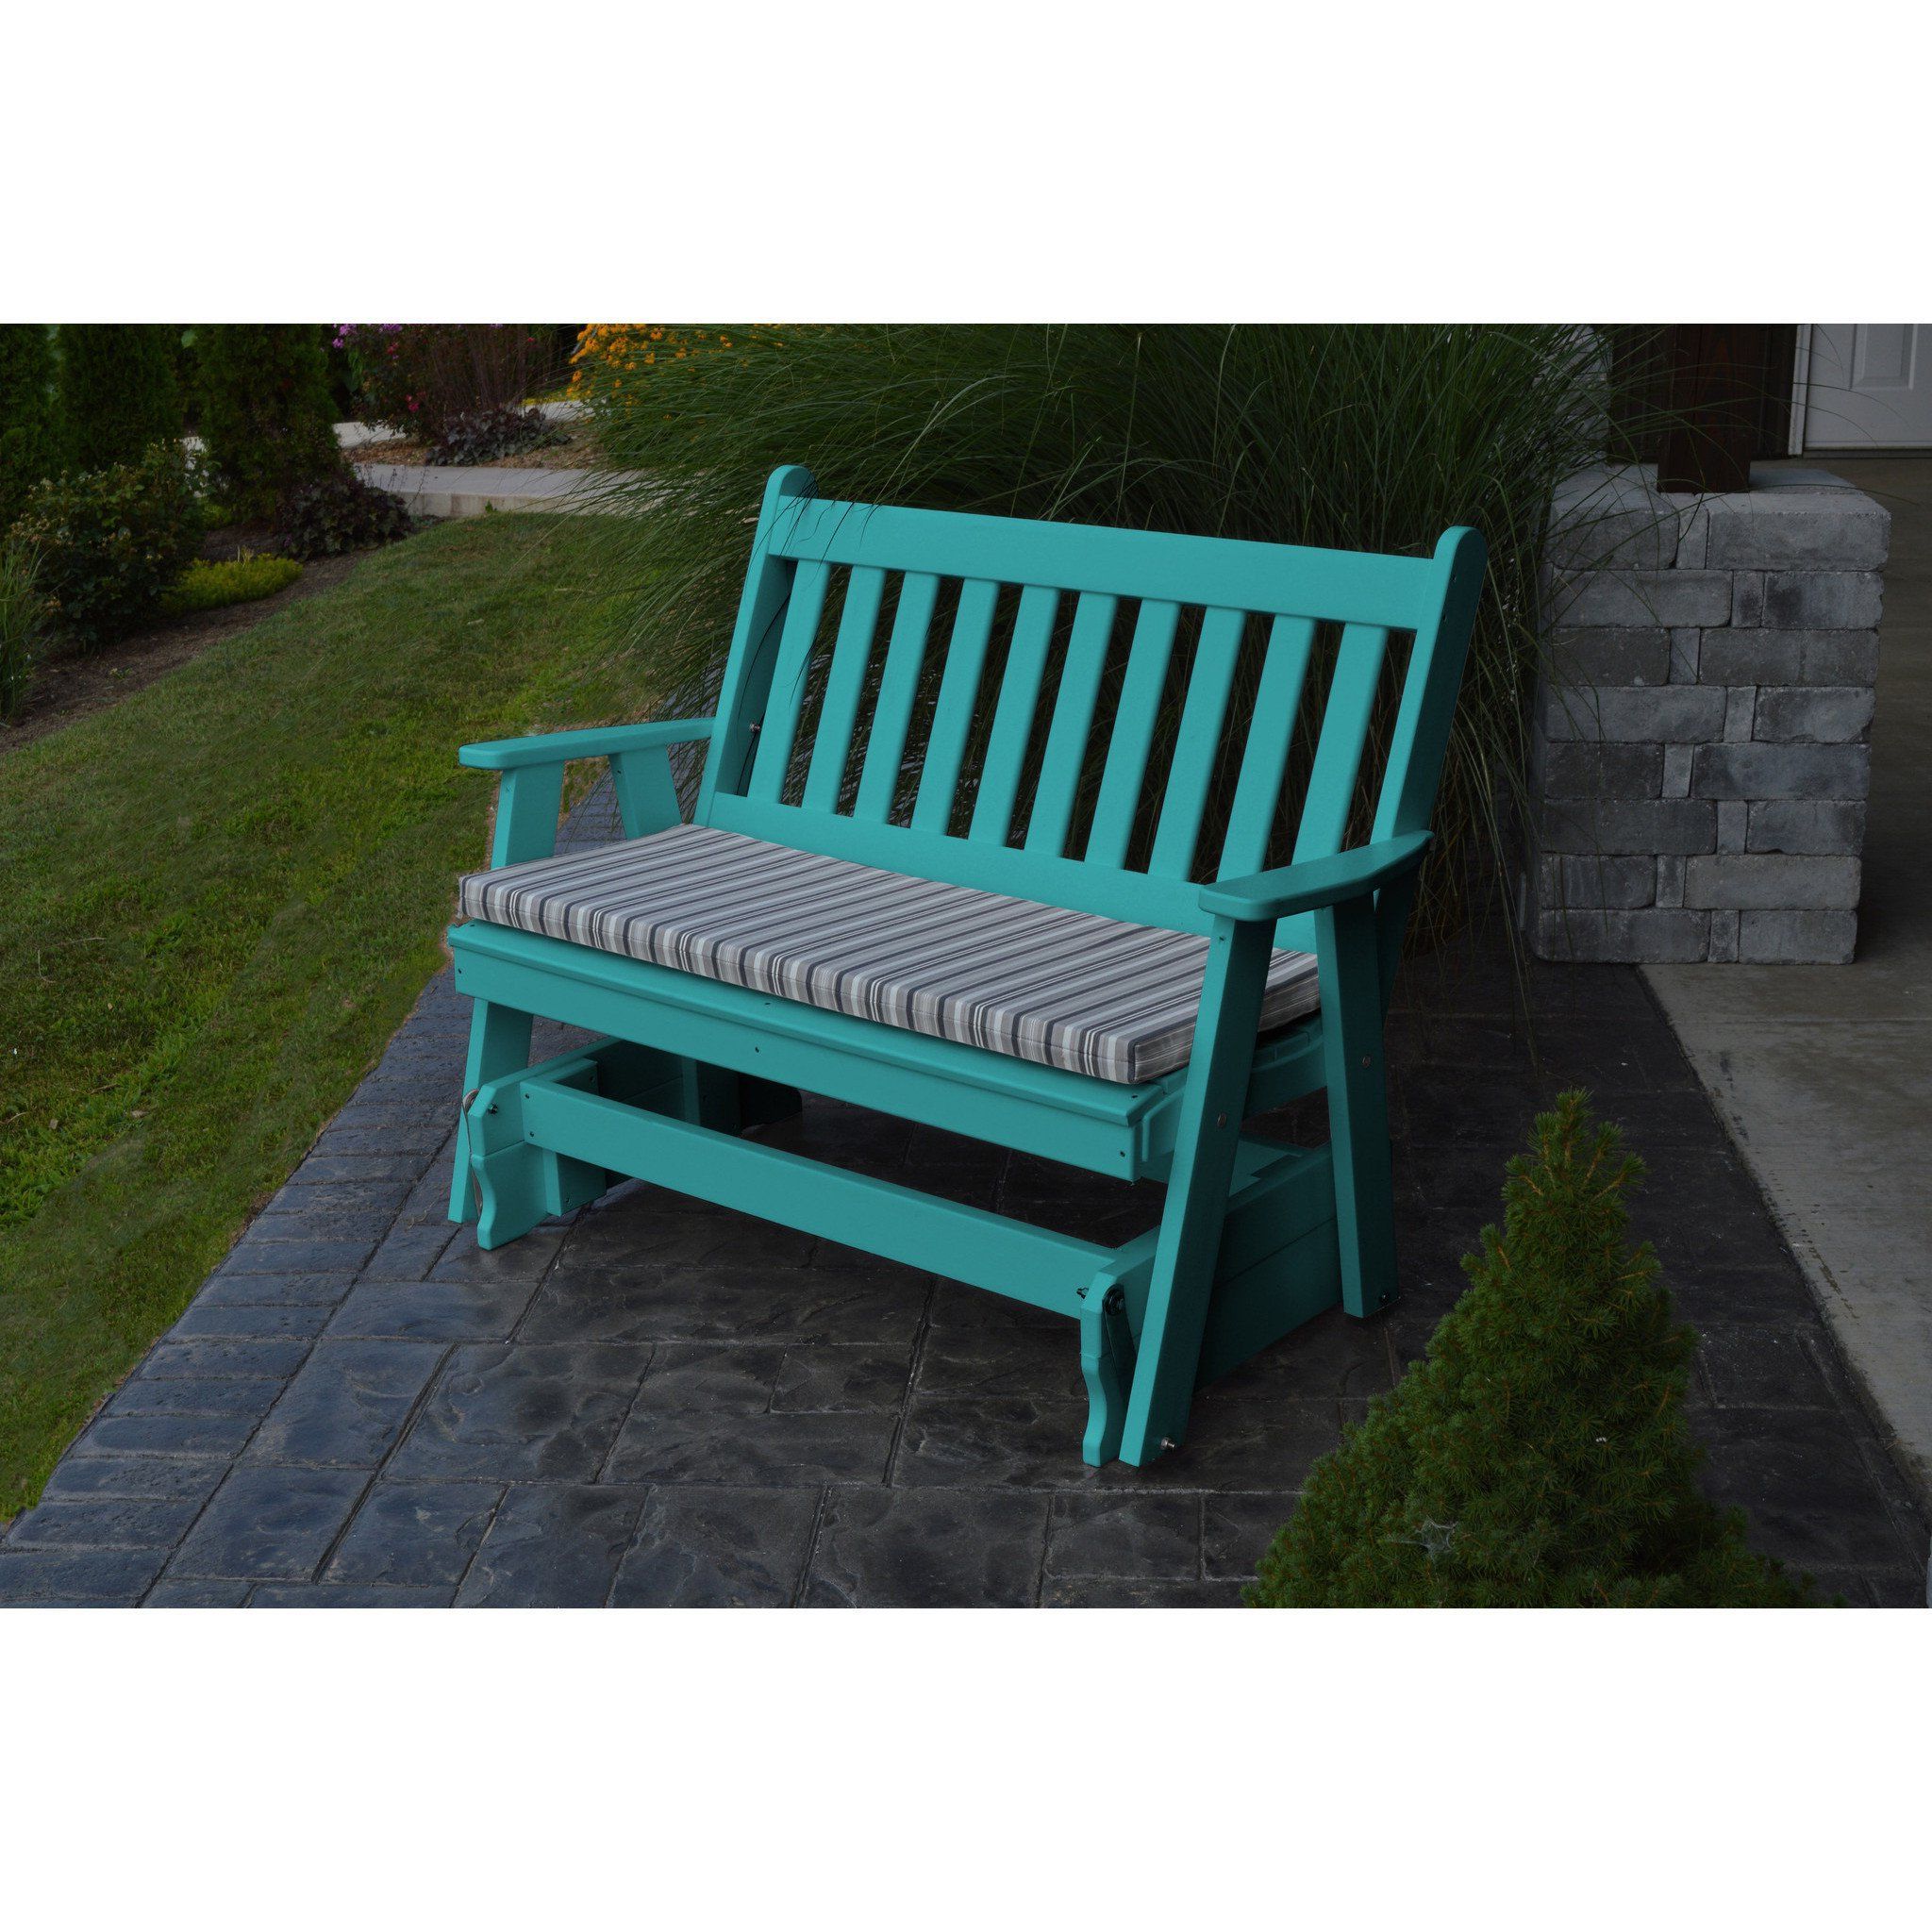 Traditional English Glider Benches With Regard To 2019 A&l Furniture Company Traditional English Recycled Plastic (View 6 of 34)